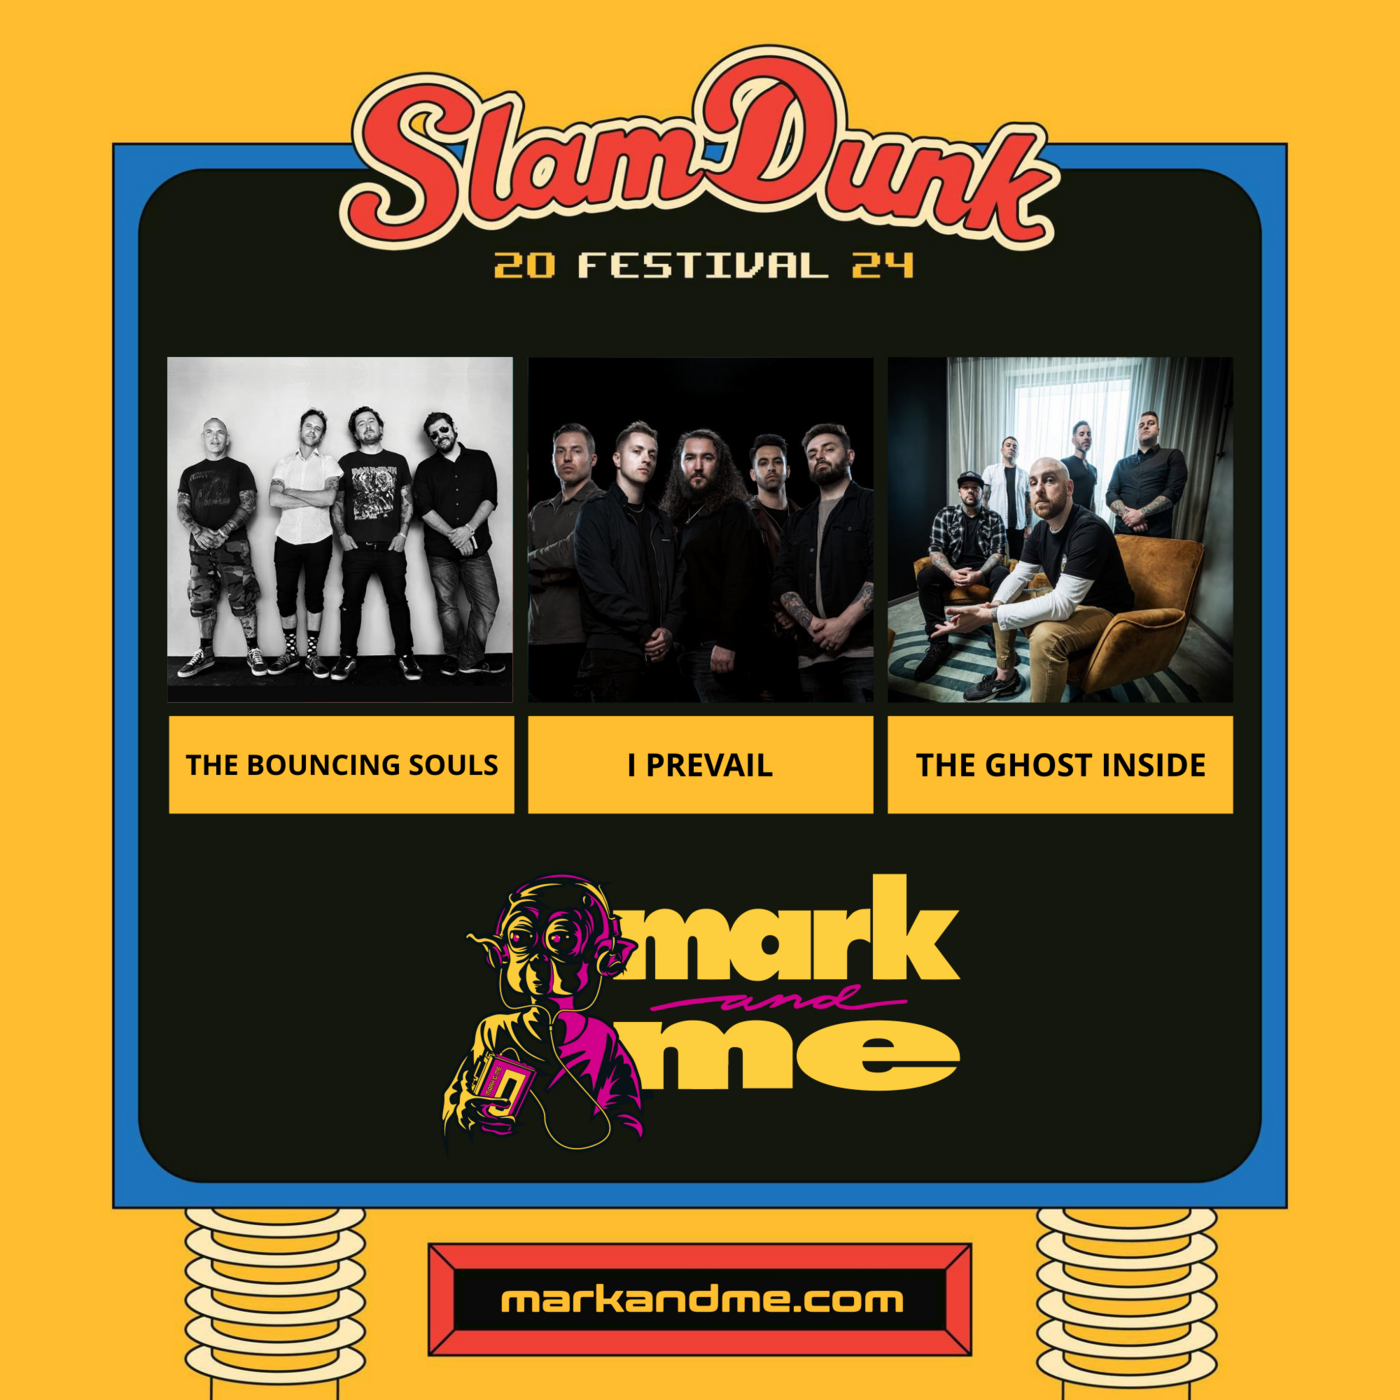 Episode 351: Slam Dunk Festival Special - The Bouncing Souls, I Prevail and The Ghost Inside